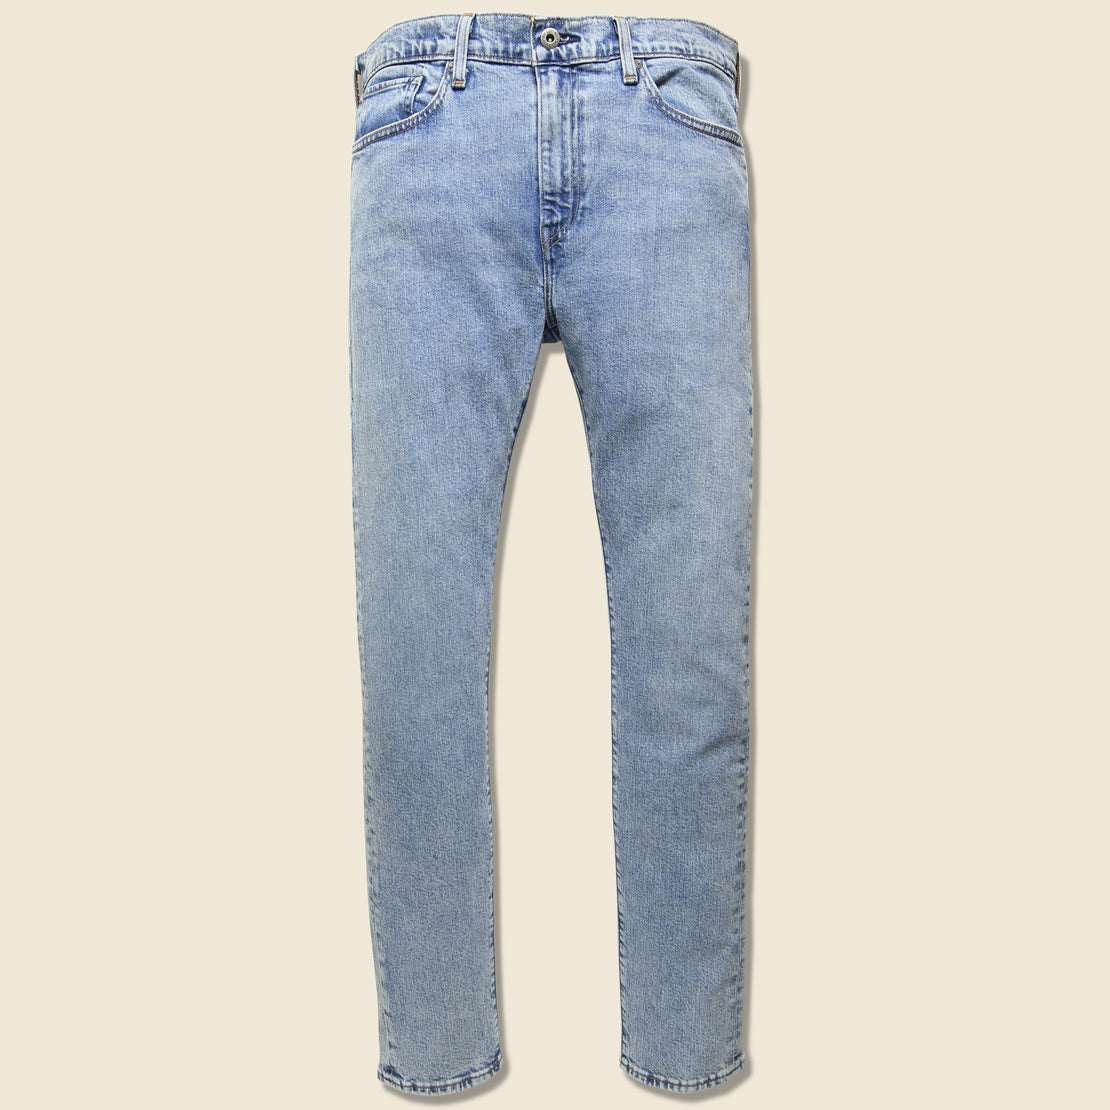 Levis Made & Crafted 510 Skinny Jean - Westward Sun